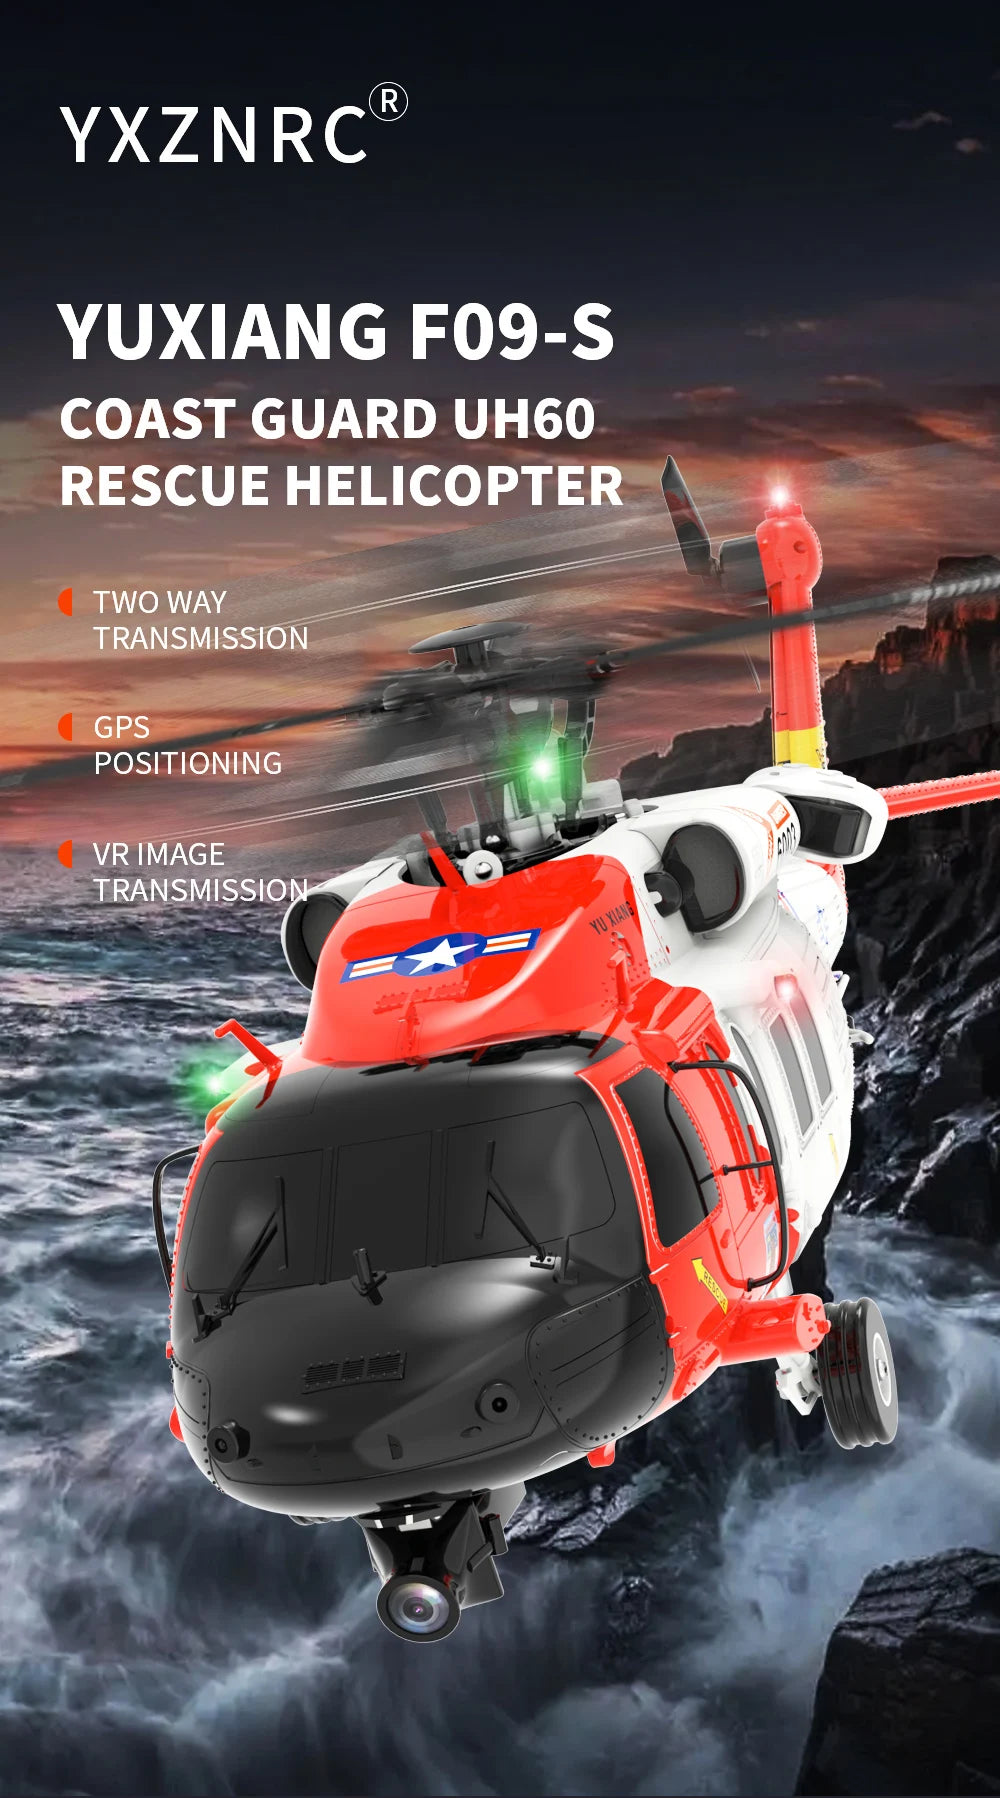 YXZNRC F09-S Flybarless RC Helicopter, YUXIANG FO9-S COAST GUARD UHGO R